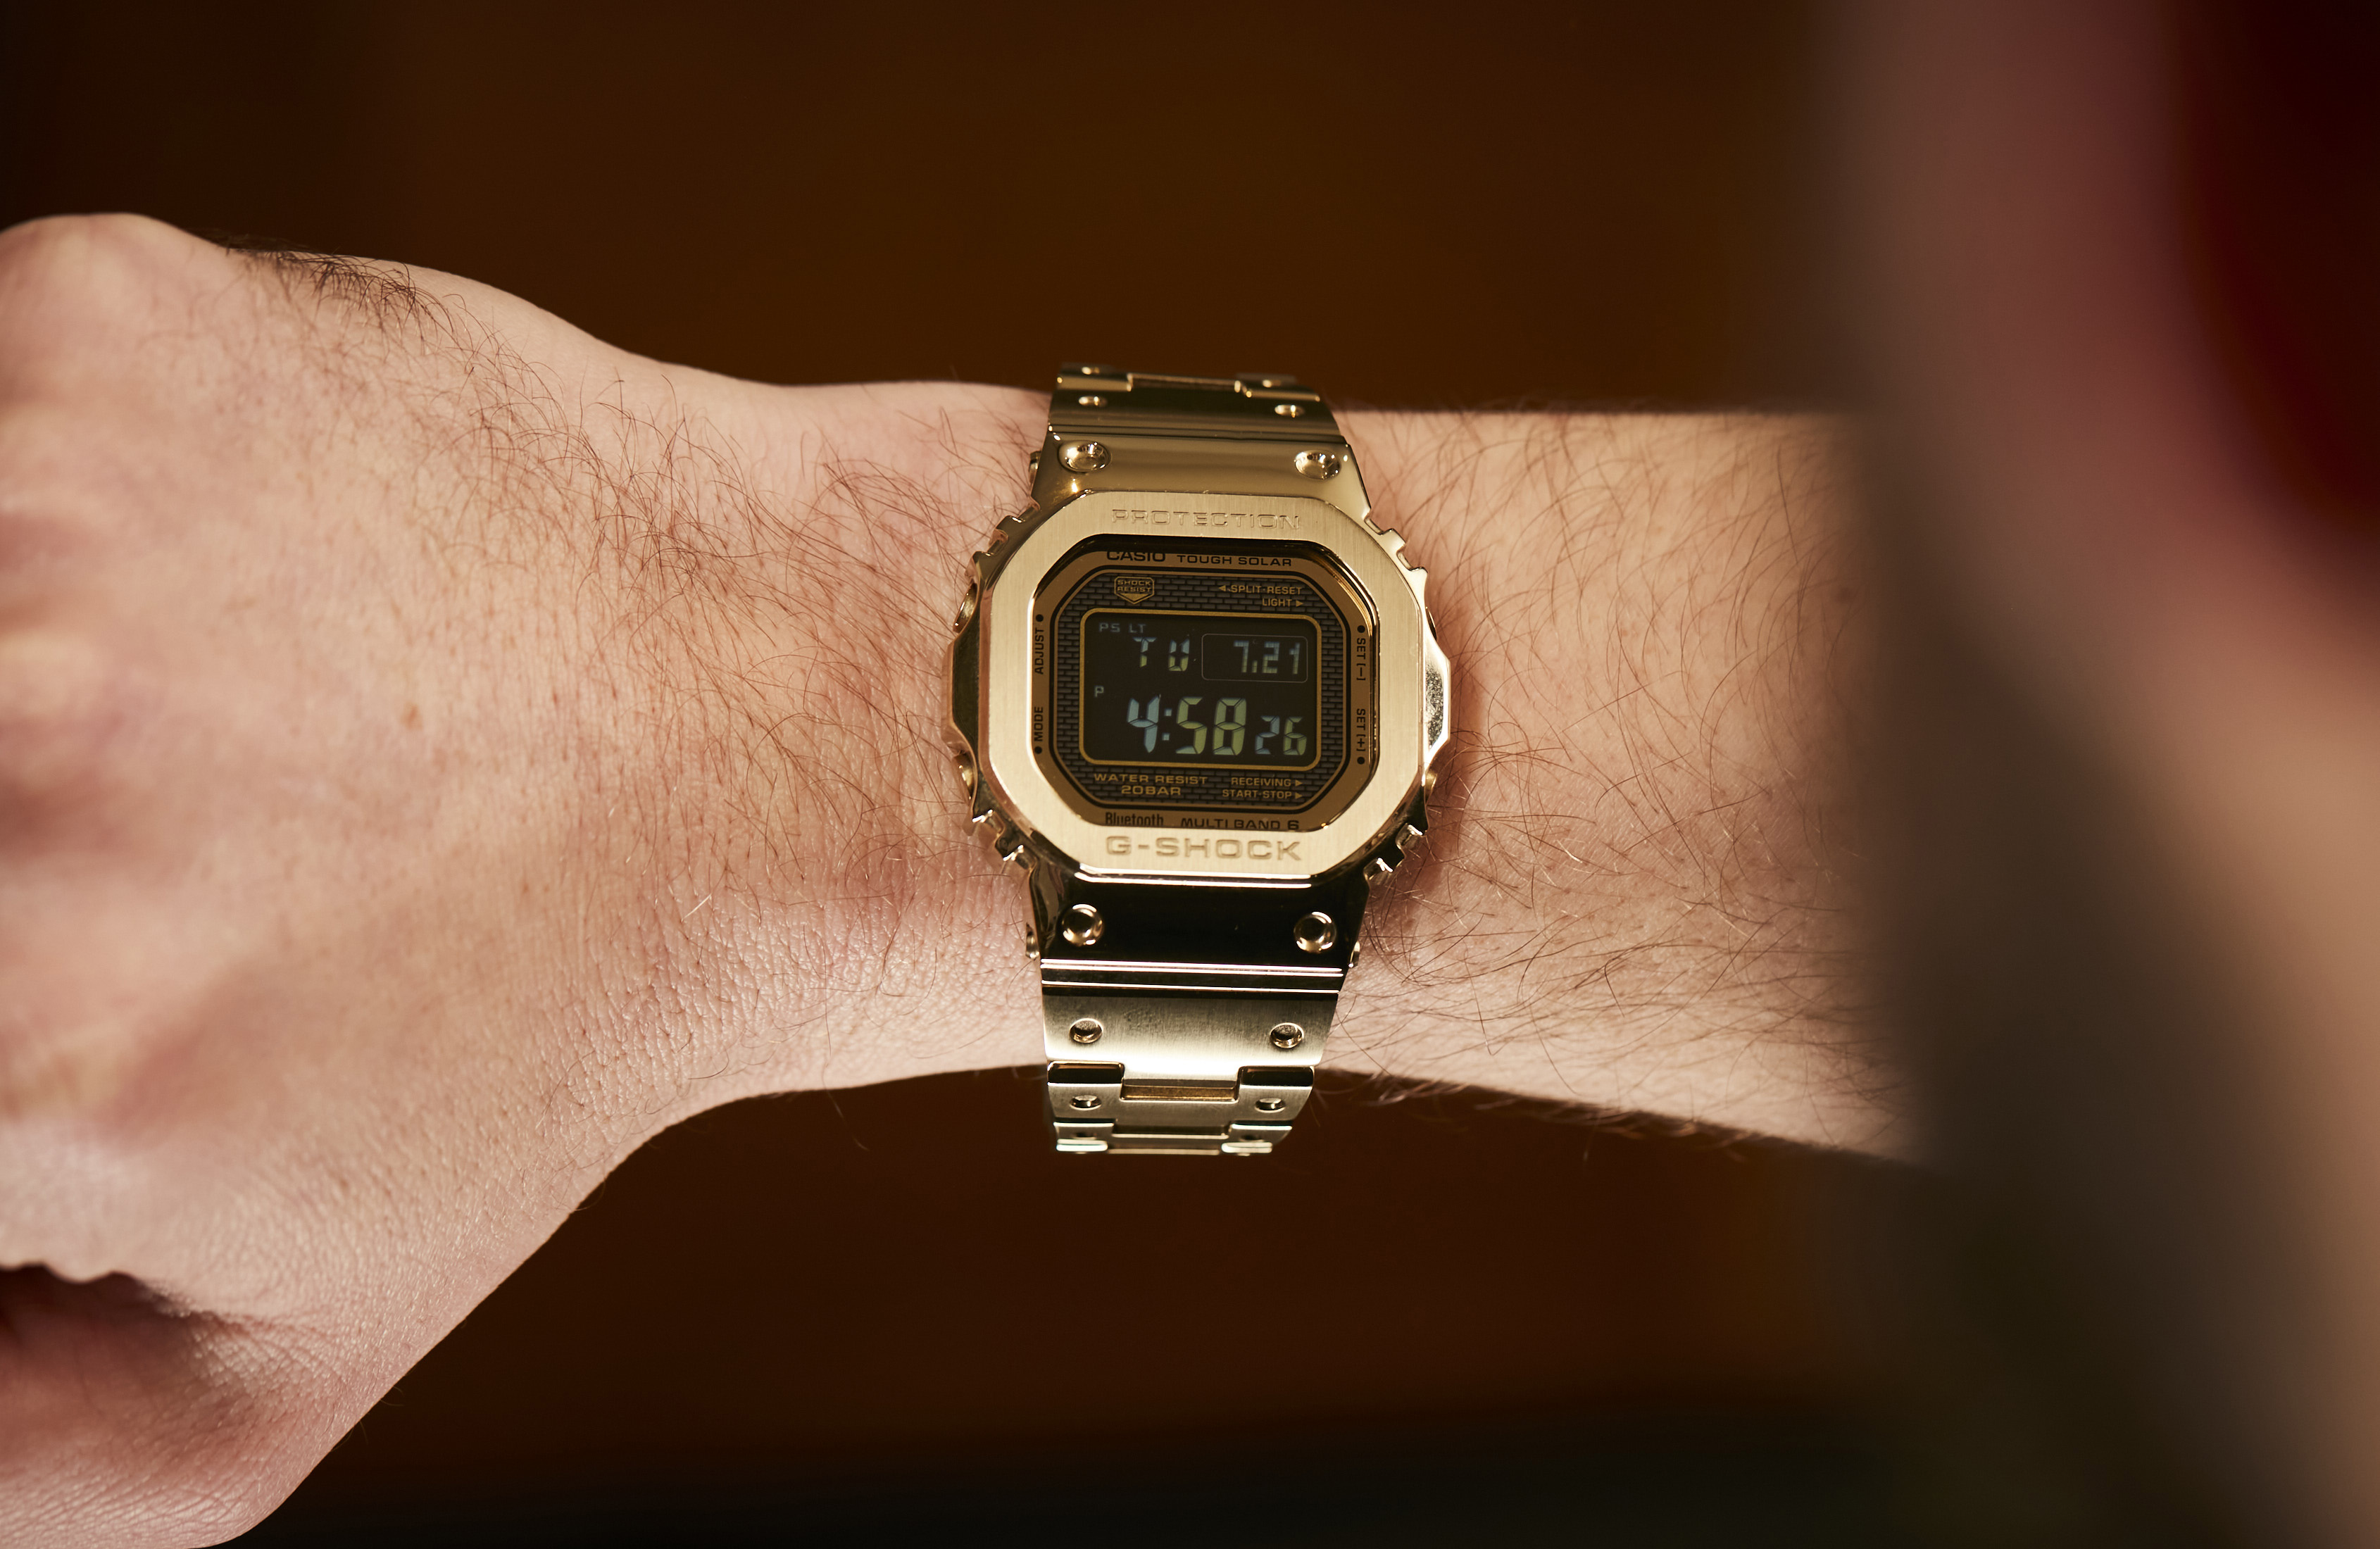 MY YEAR WITH: The Casio G-Shock Full Metal GMW-B5000GD-9. Did the